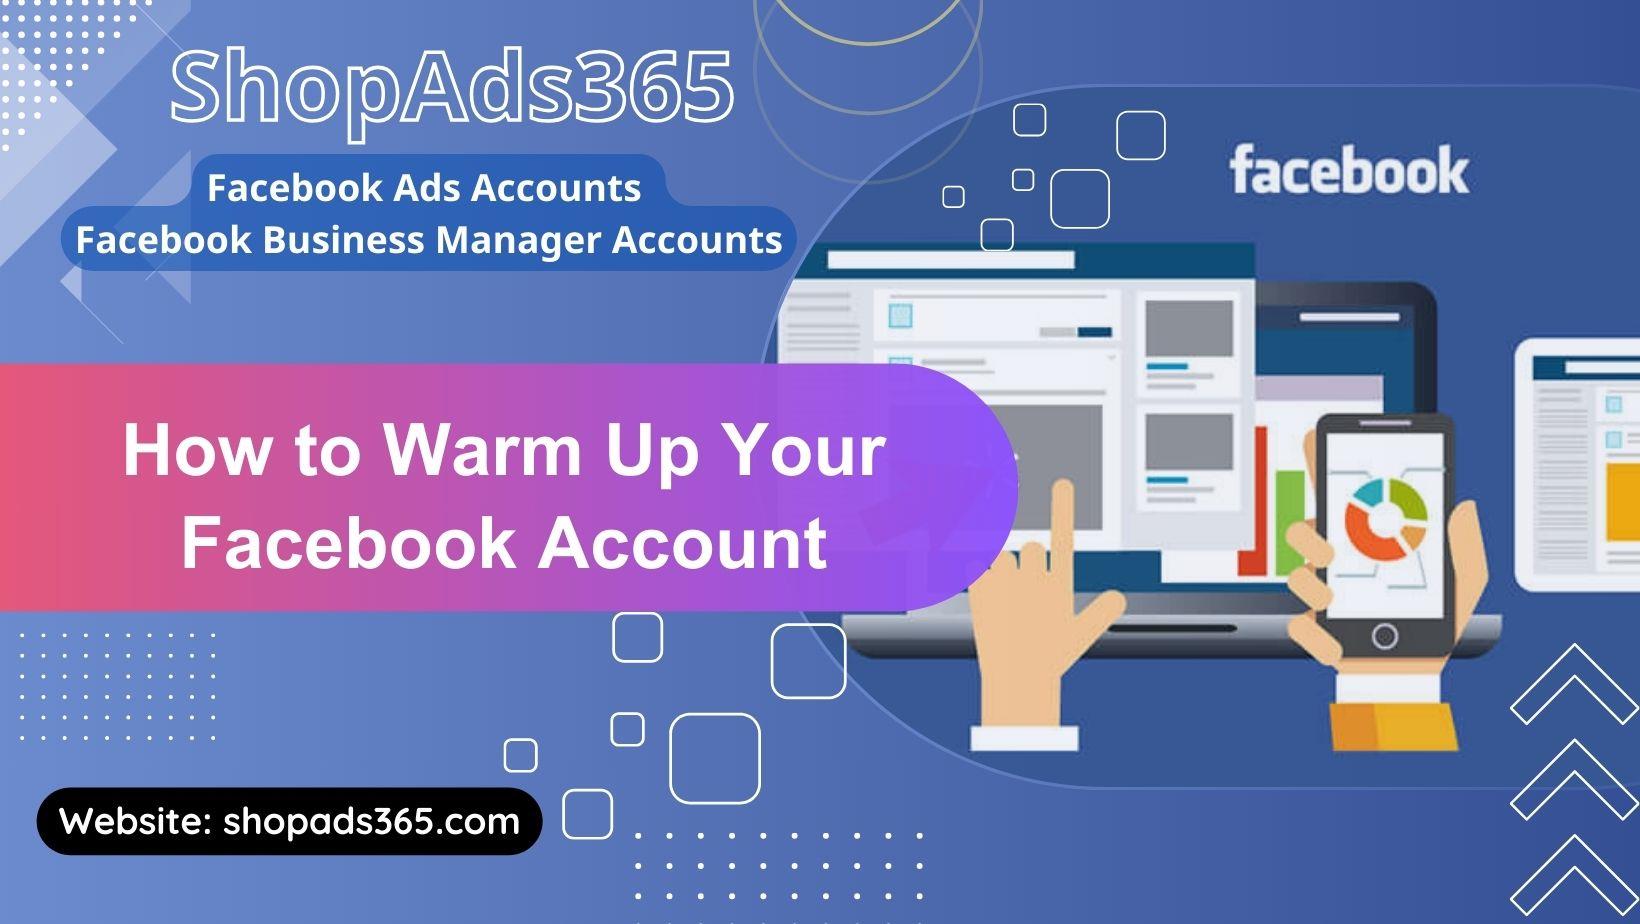 How to Warm Up Your Facebook Account